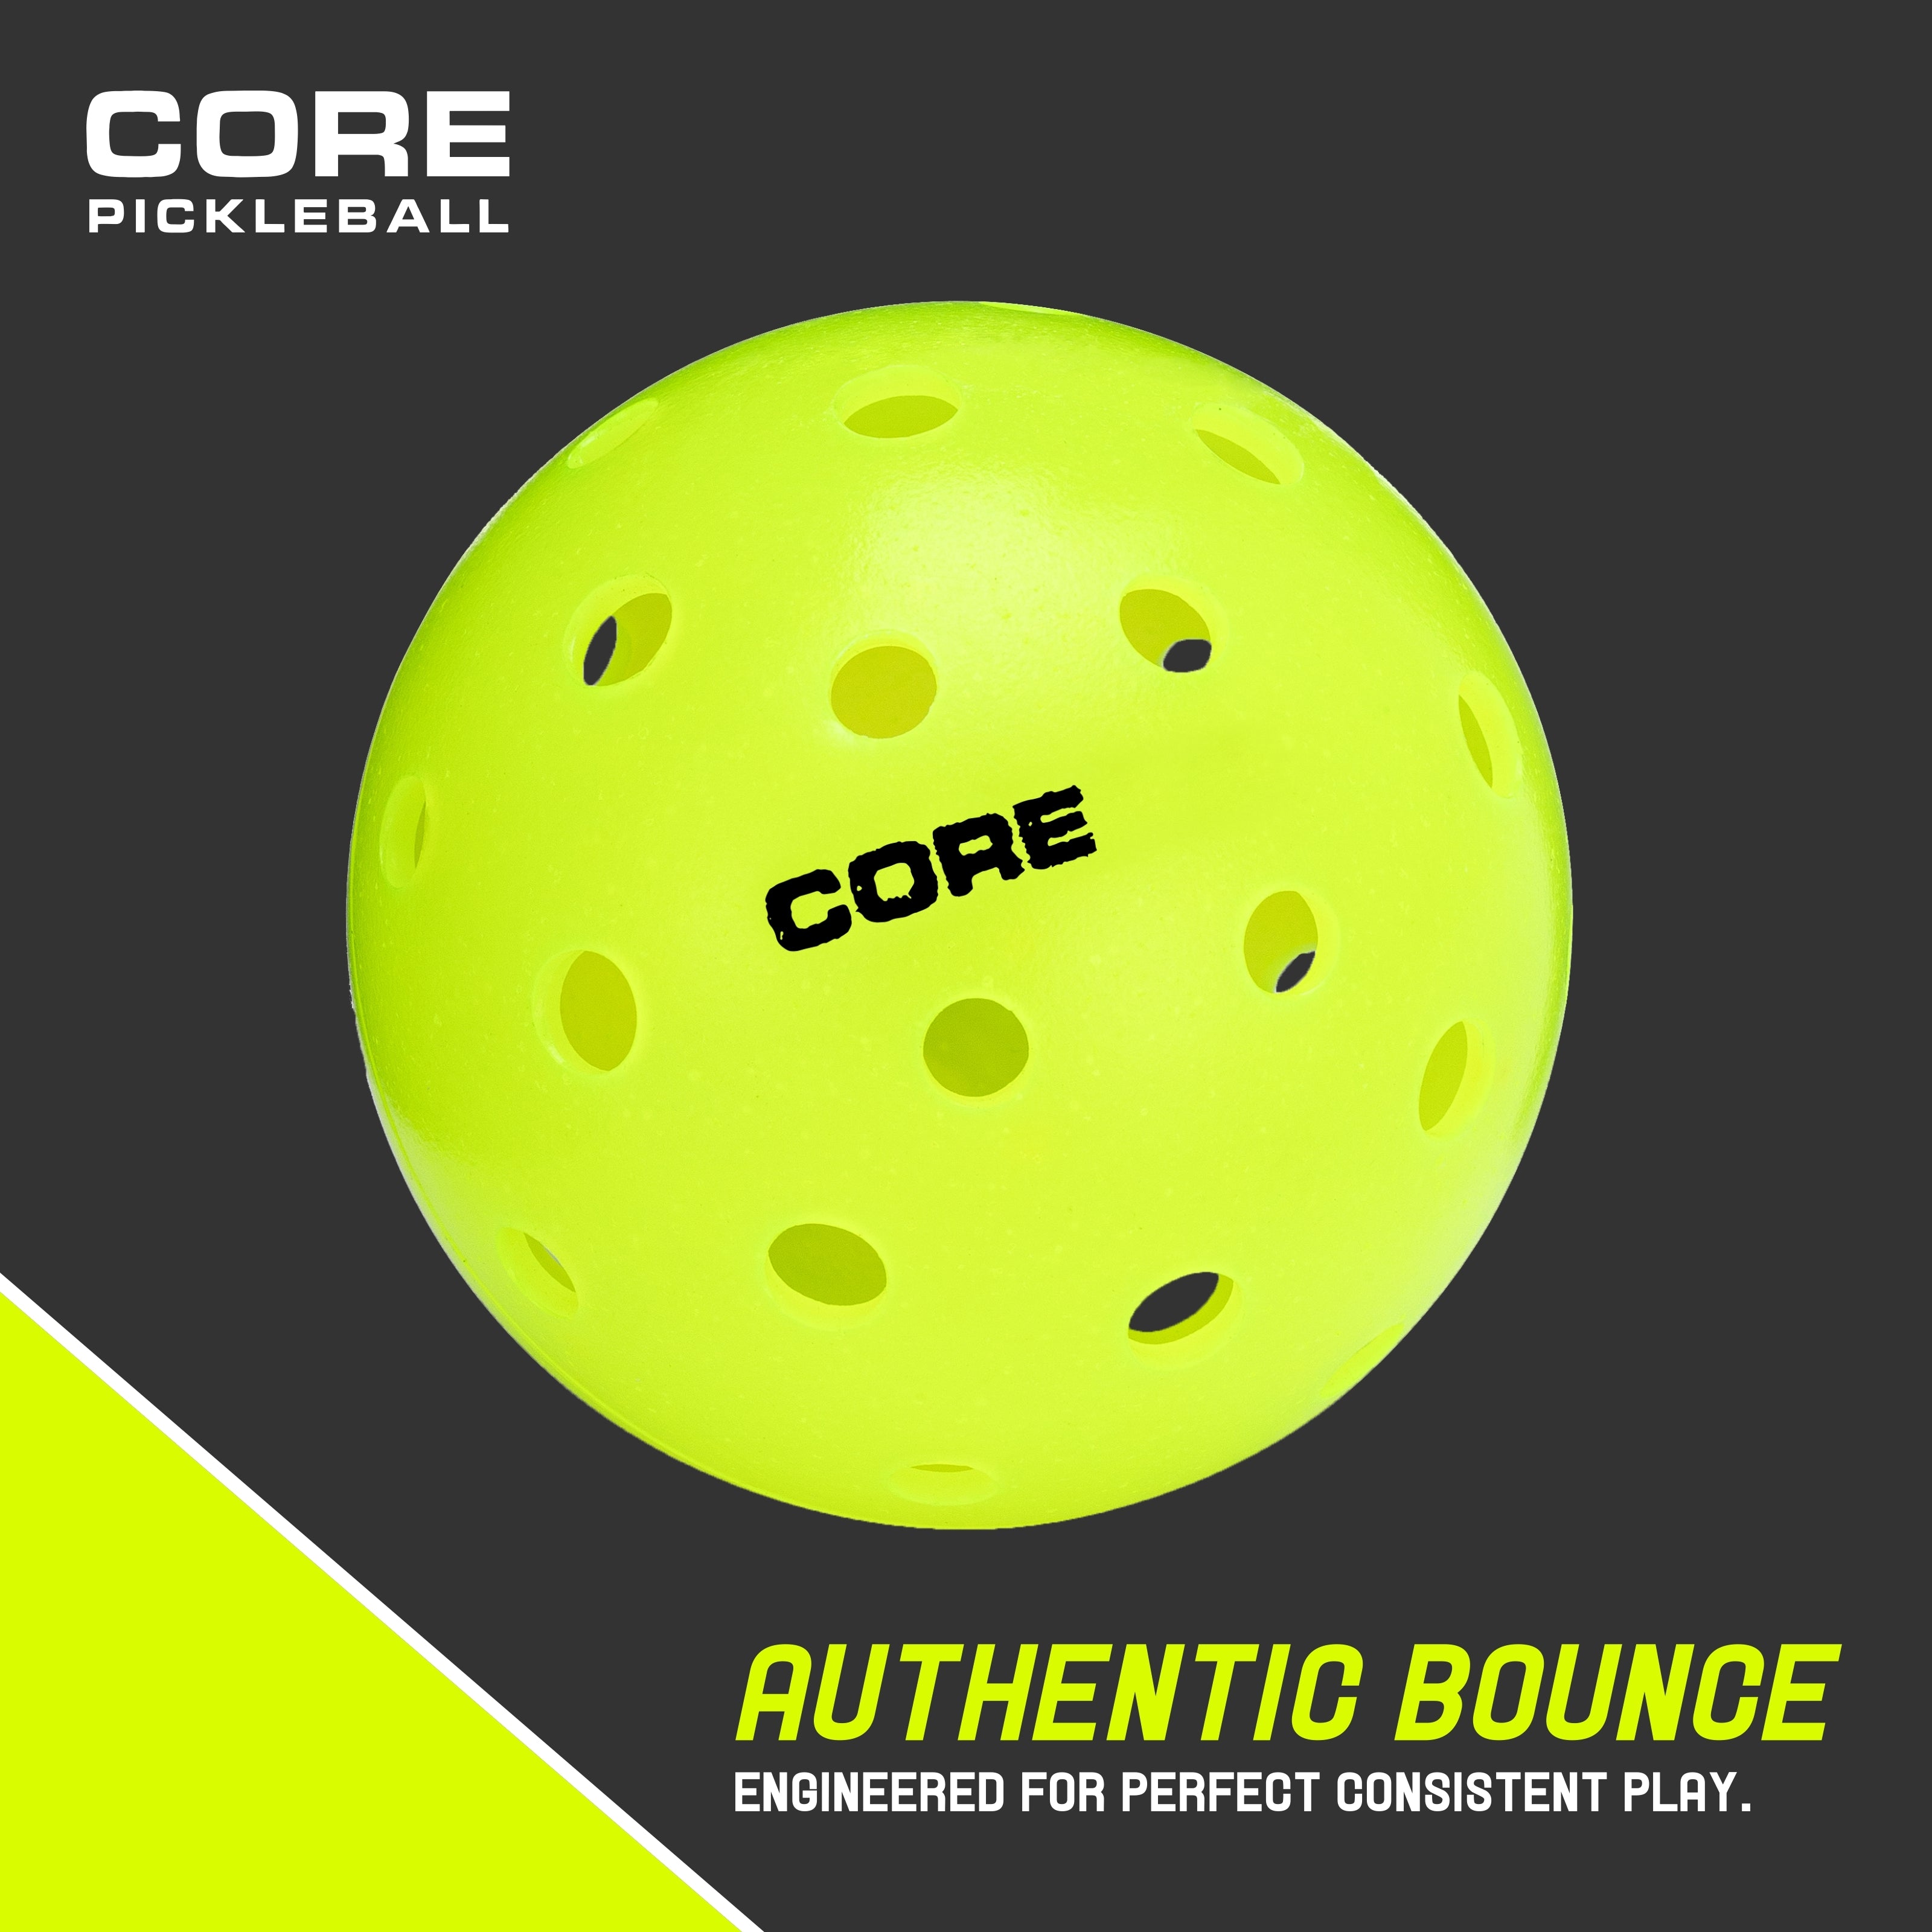 CORE Pickleball Outdoor - Fast and Built to Last | USA Pickleball Approved - CORE Pickleball